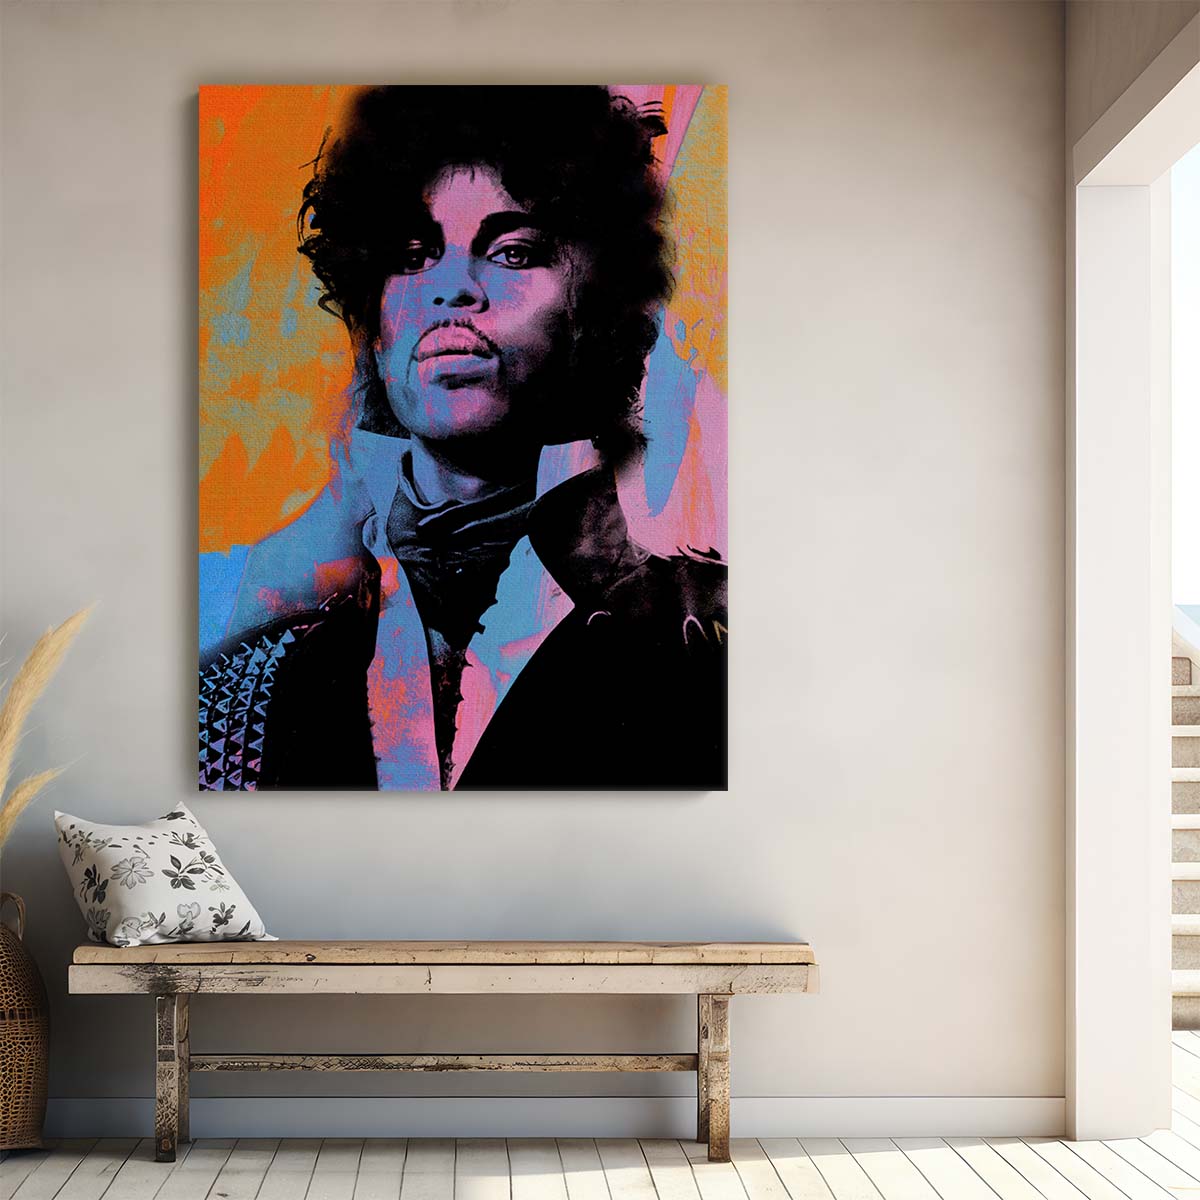 Prince Portrait Bright Colors Wall Art by Luxuriance Designs. Made in USA.